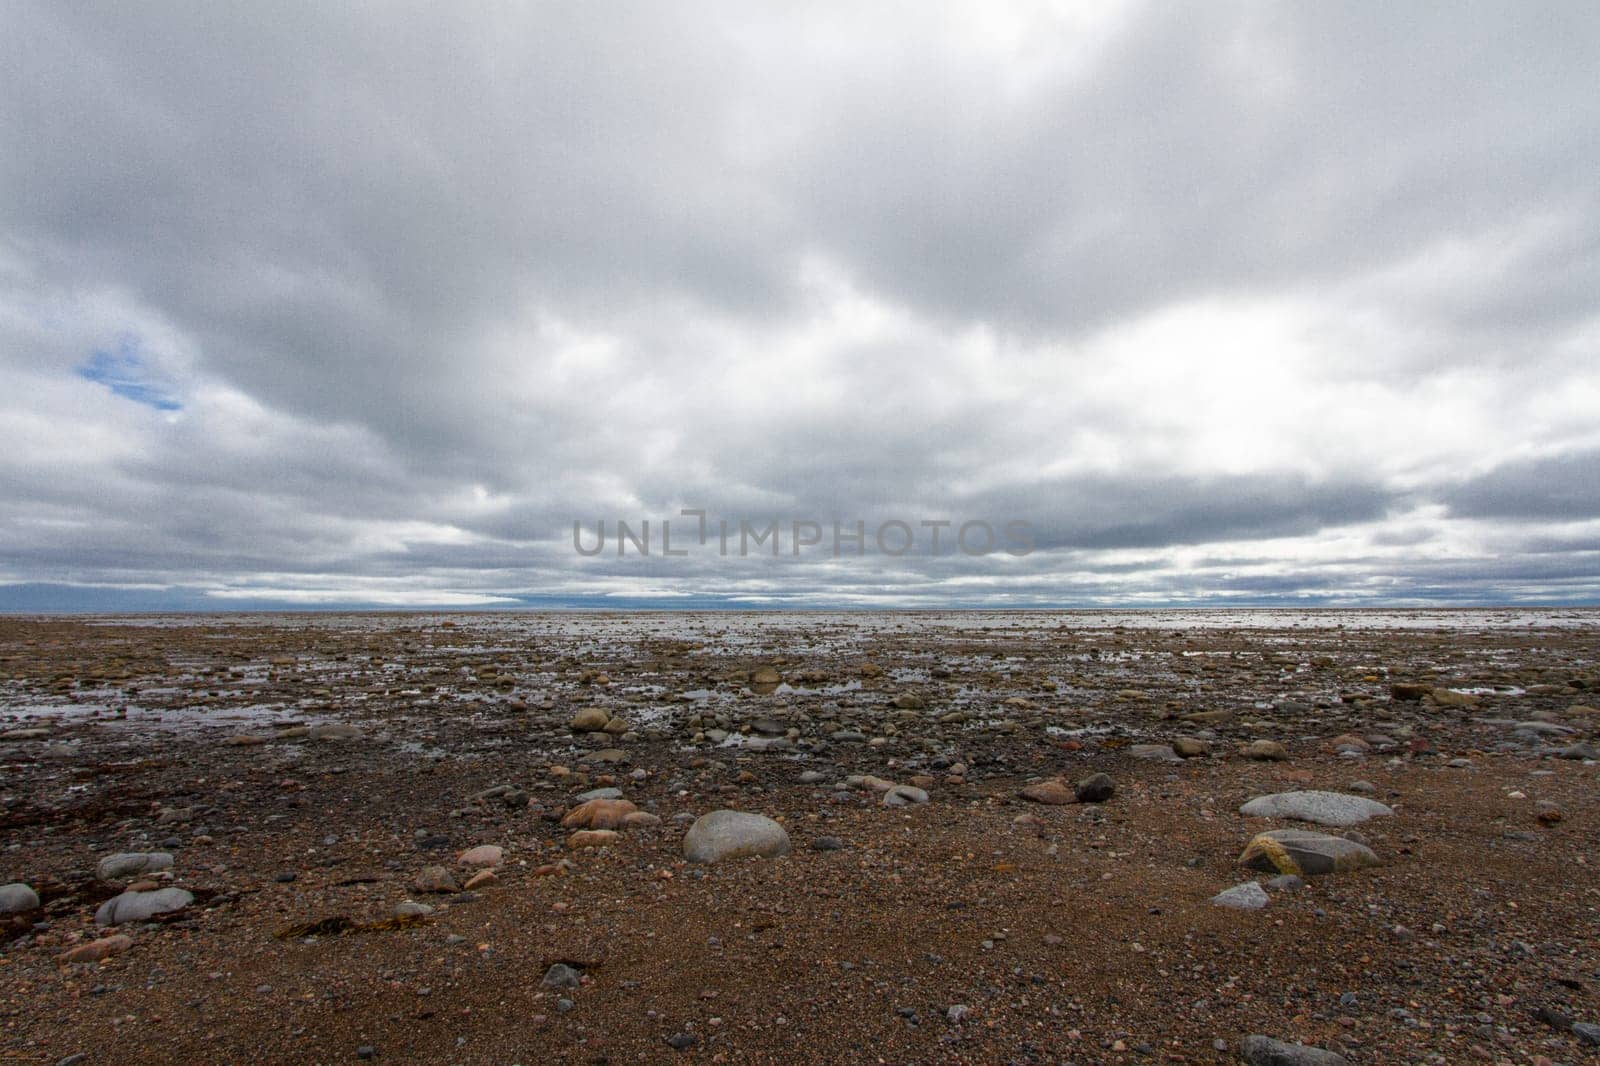 Arctic ocean shoreline at low tide exposing rocks, on a cloudy day by Granchinho